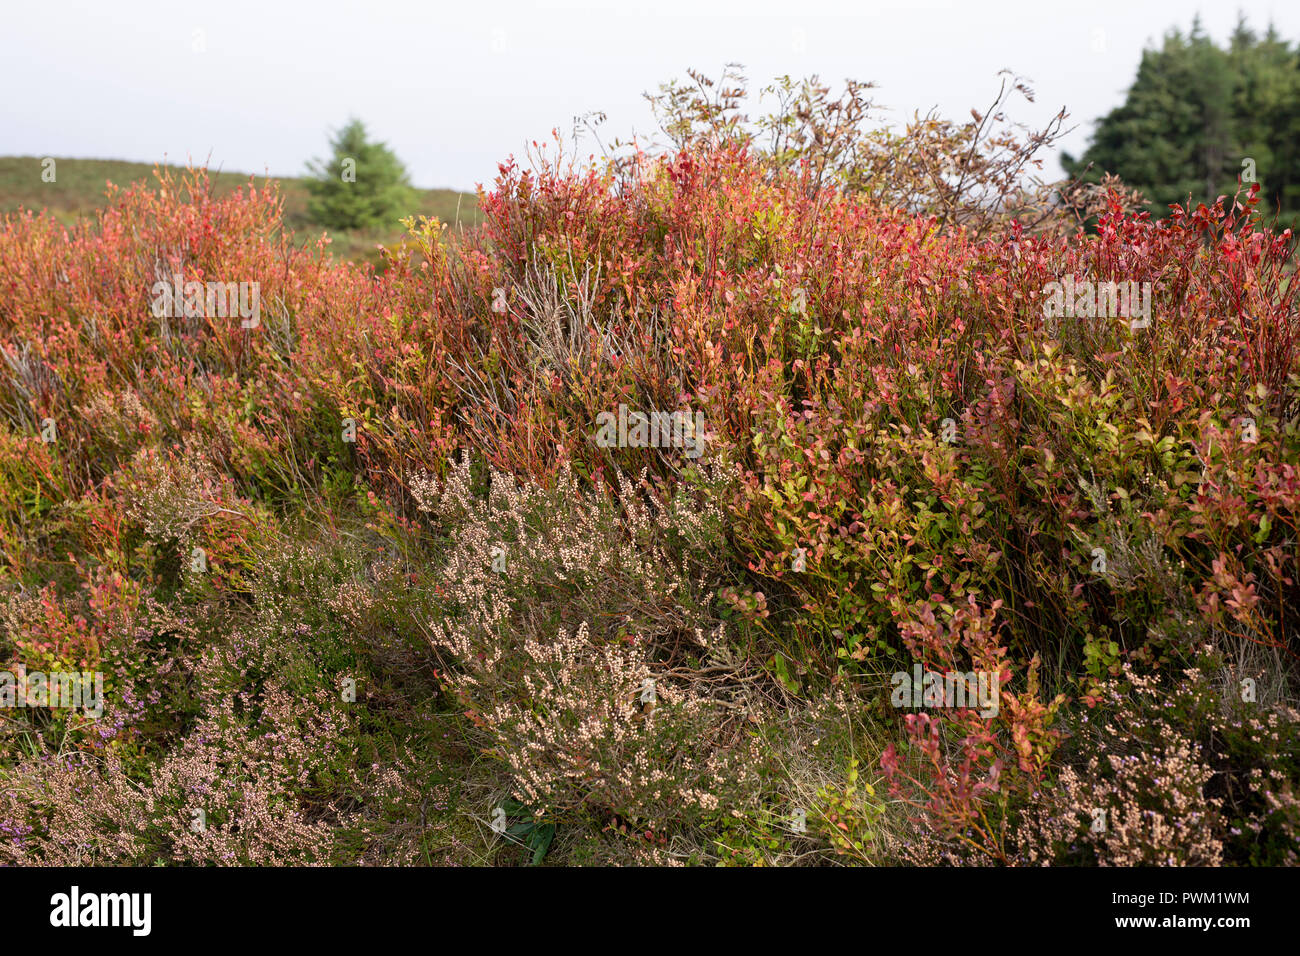 Colourful flora seen at Sally Gap, County Wicklow, Ireland. Stock Photo